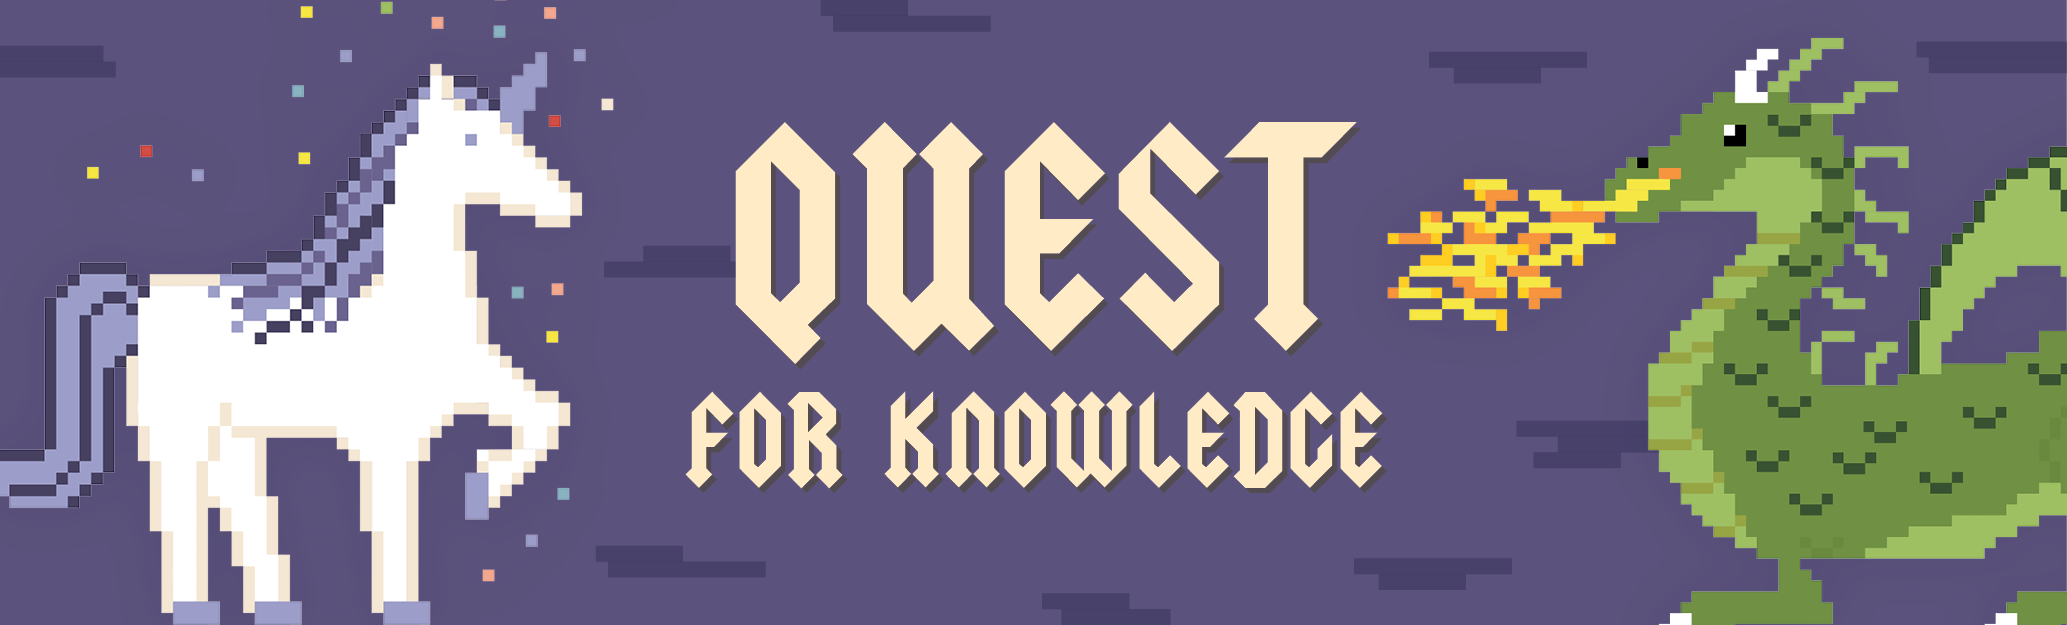 Test thy mettle in the Quest for Knowledge